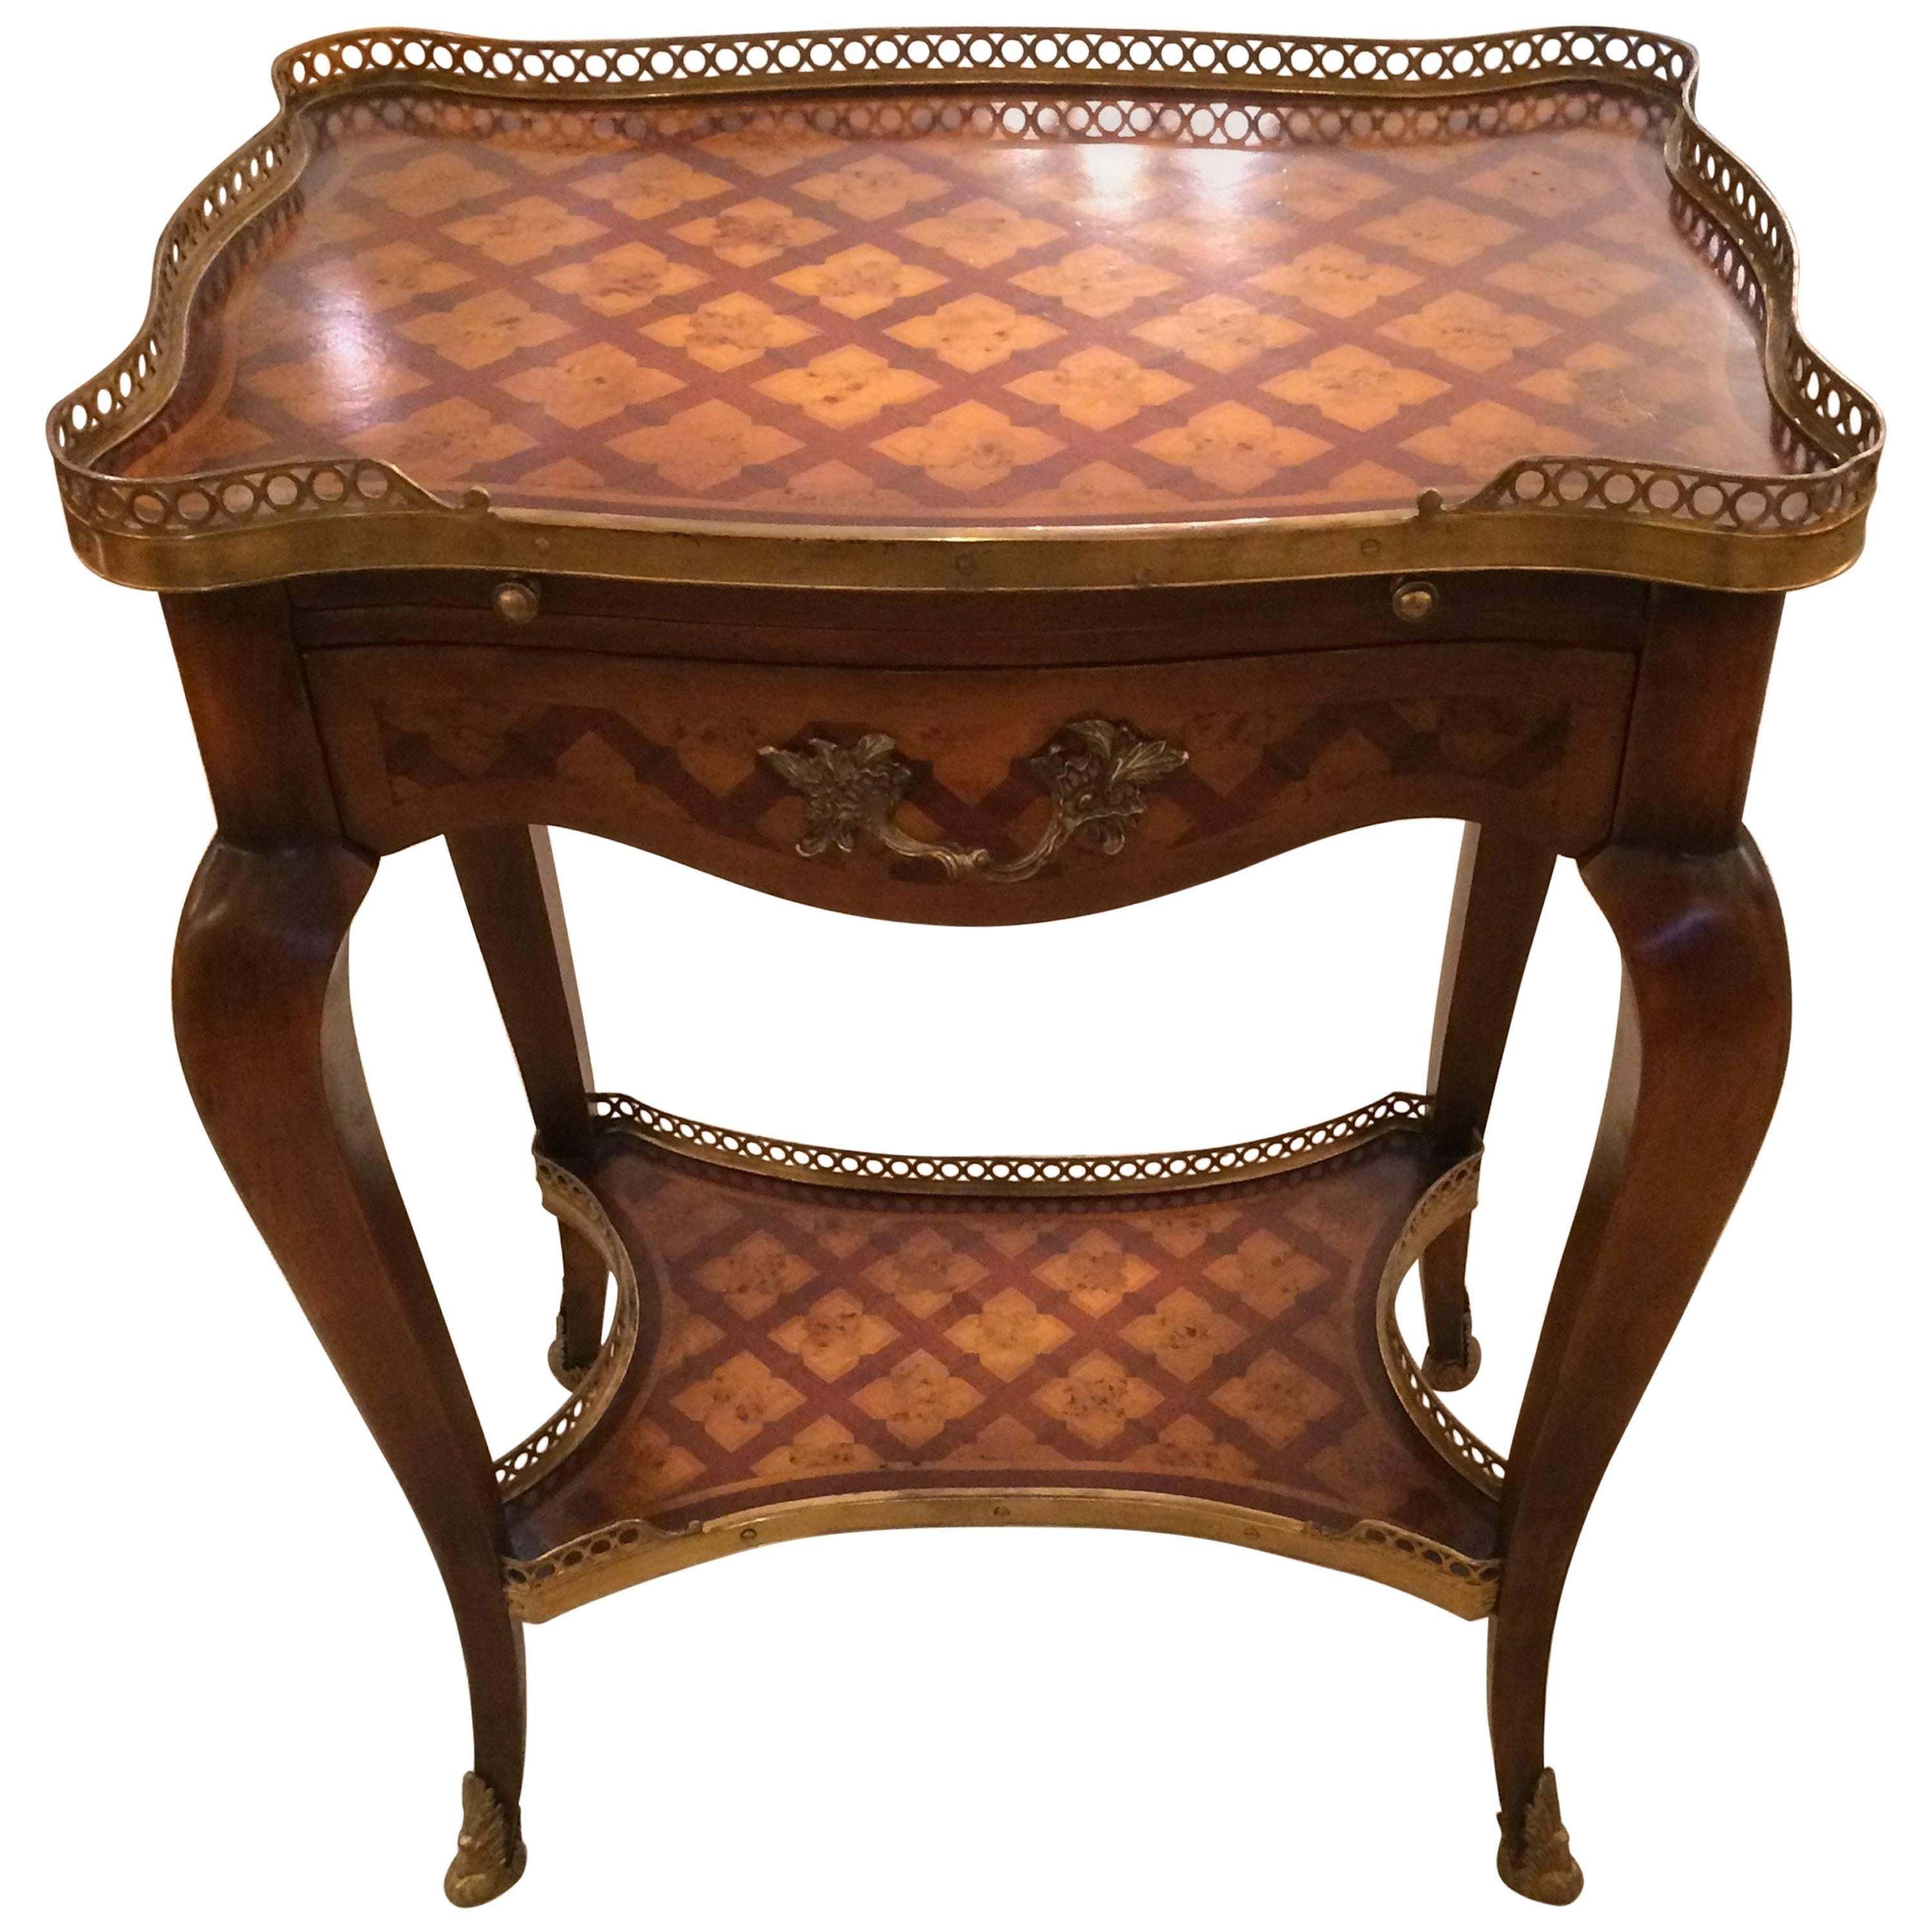 Elegant Theodore Alexander Inlaid Side Table with Drawer